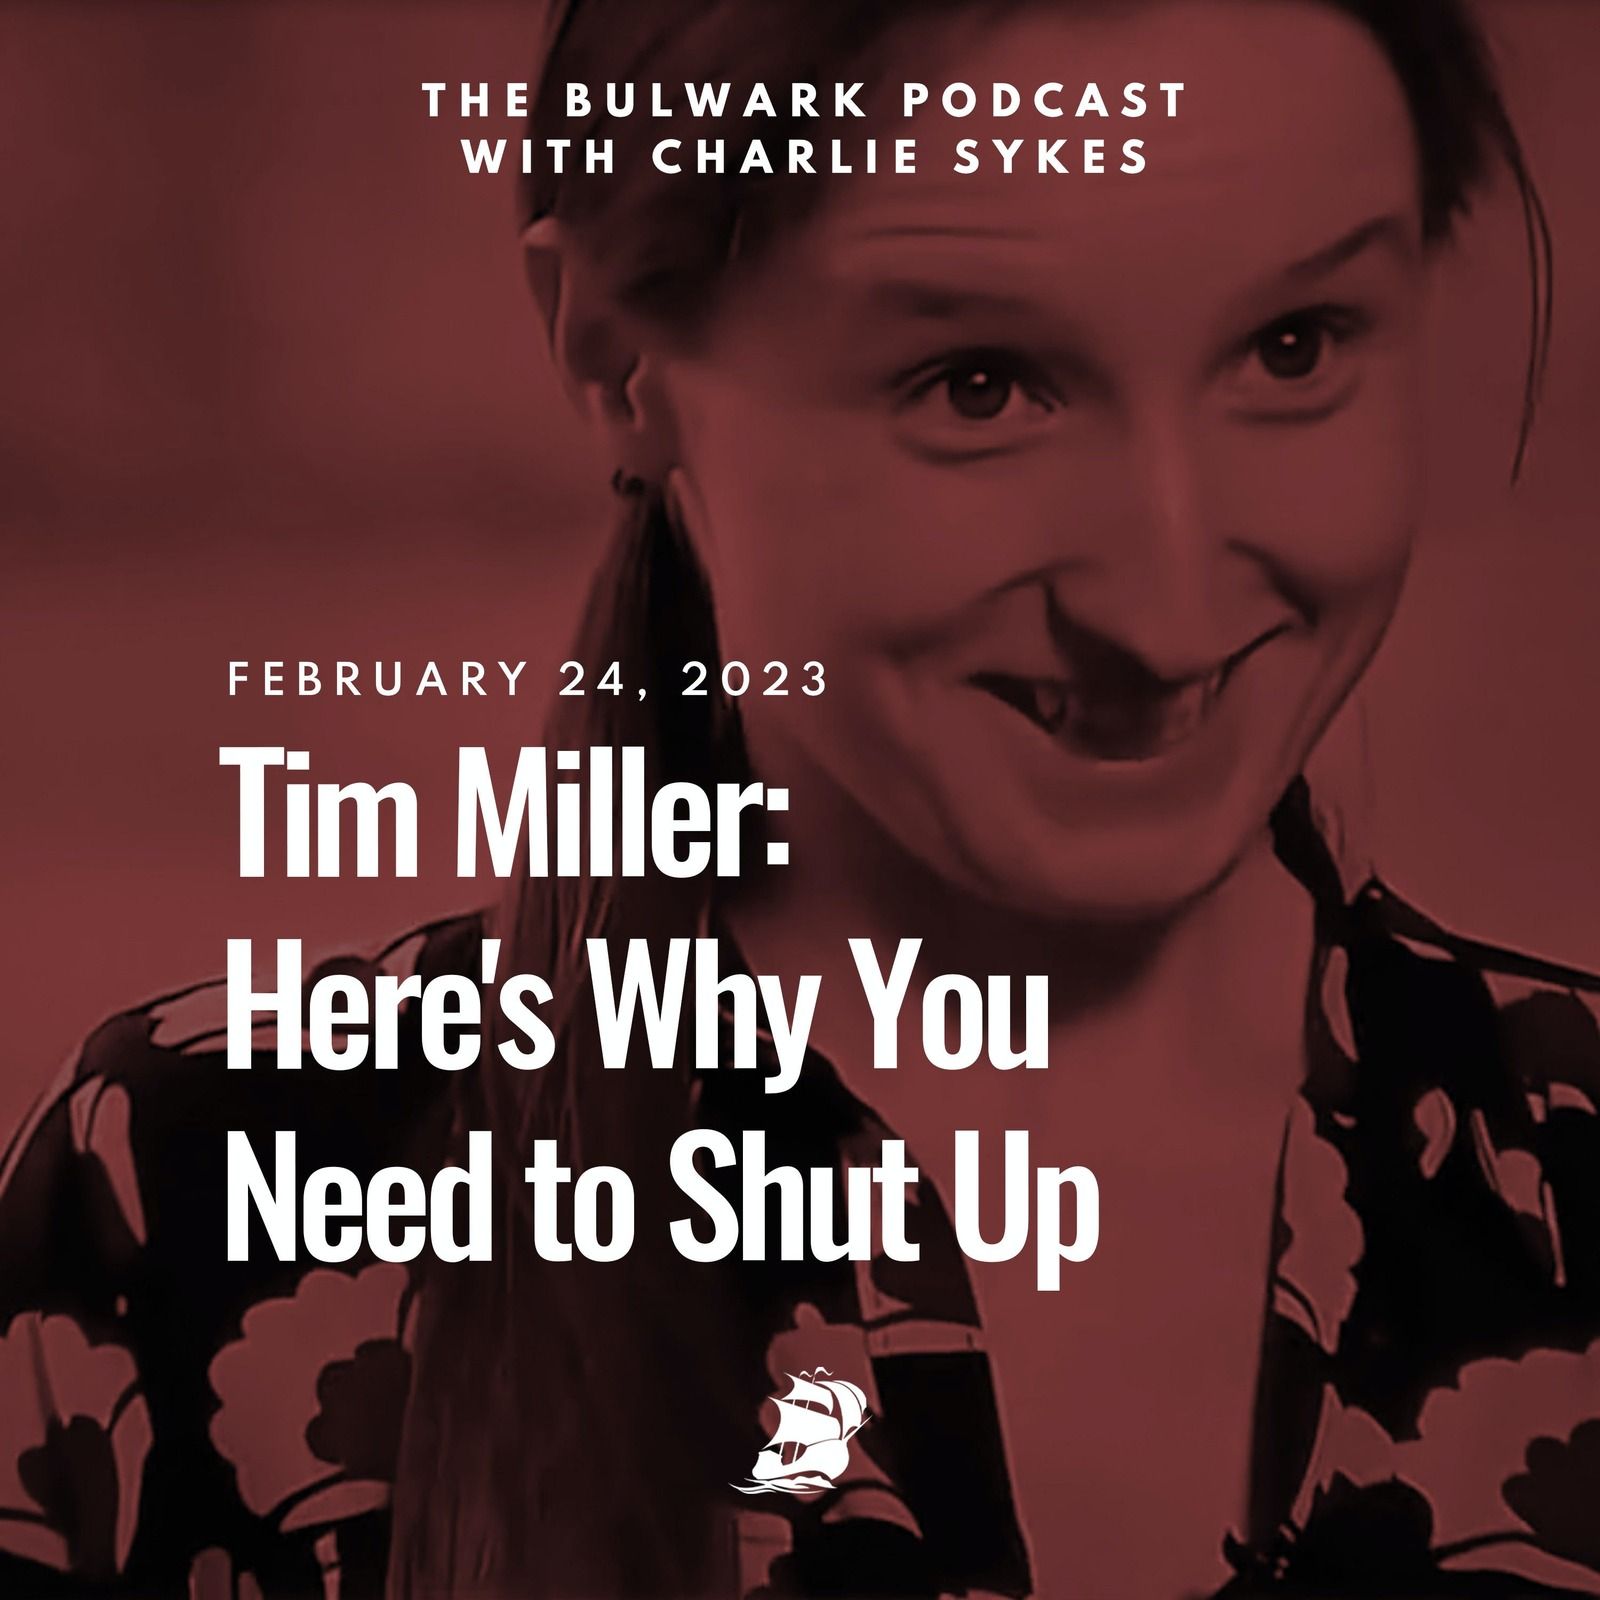 Tim Miller: Here's Why You Need to Shut Up by The Bulwark Podcast